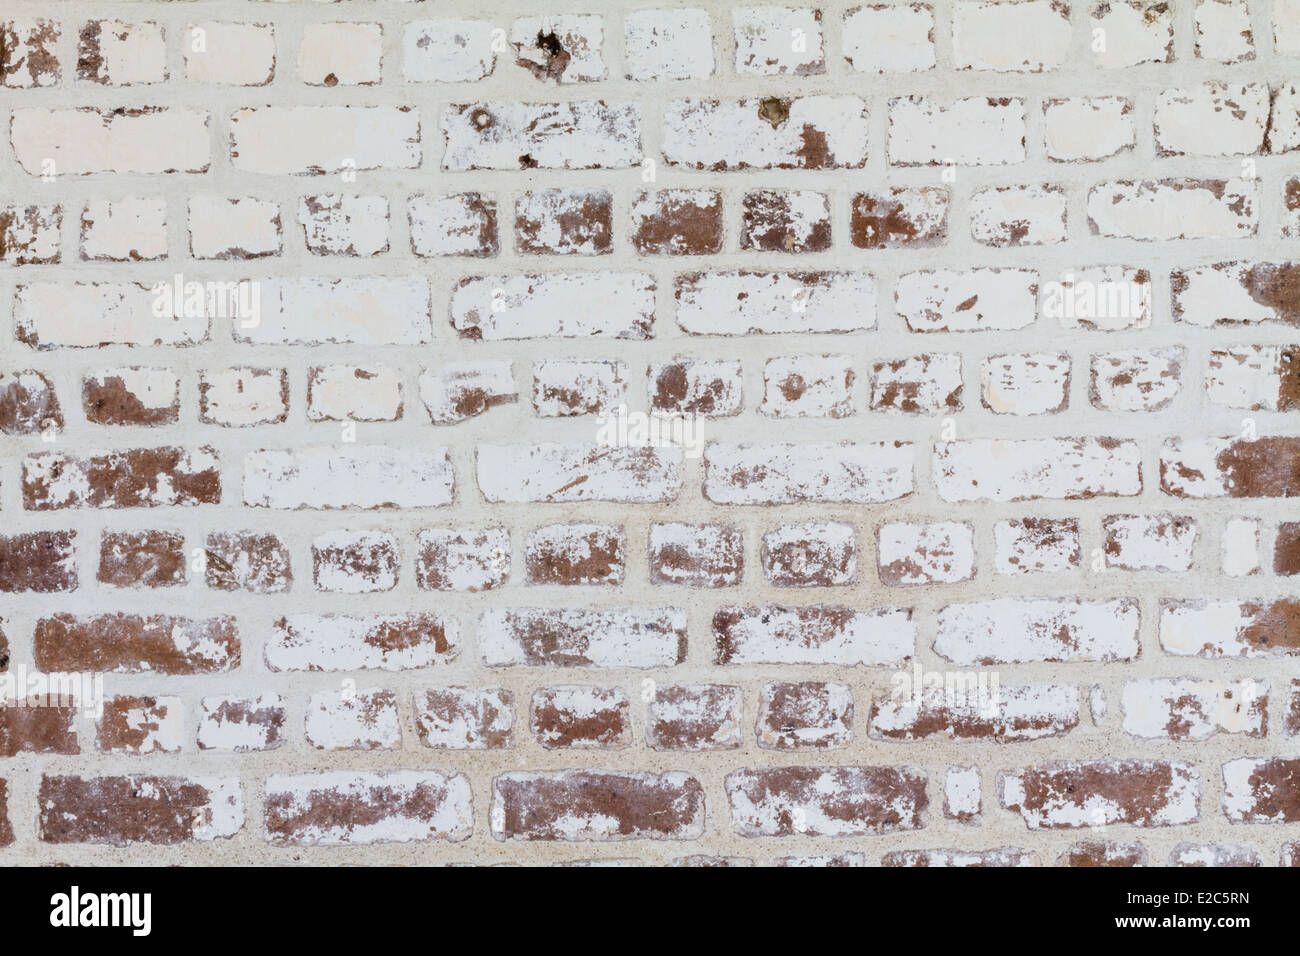 Rough textured brick wall background. Stock Photo